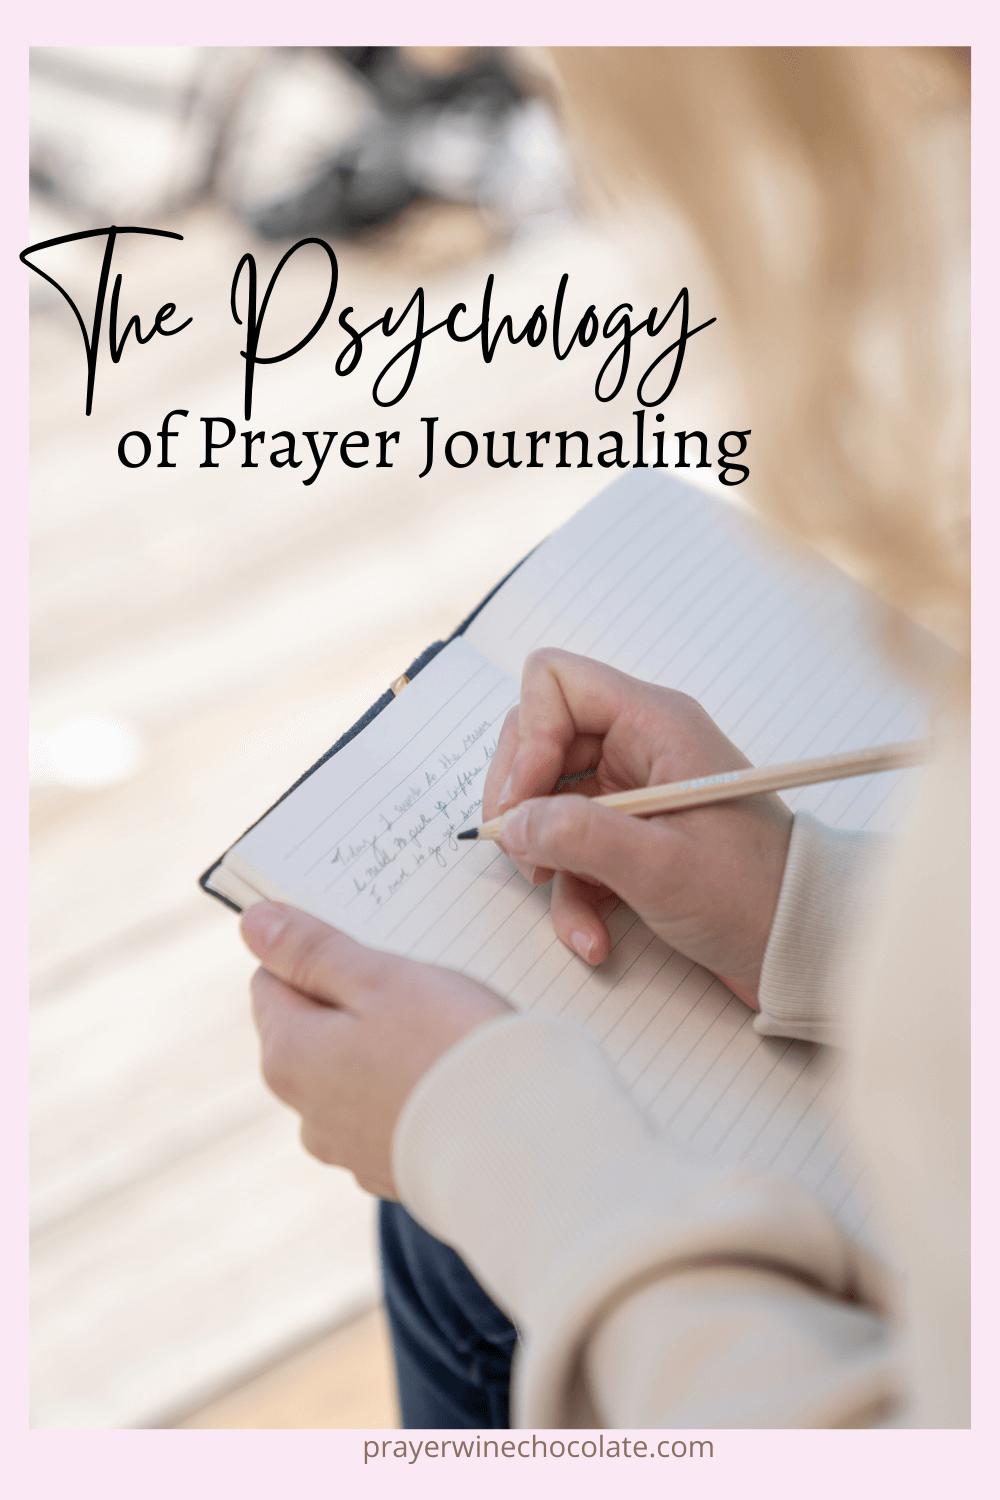 photo of a girl writing the name of the post is written above it The Psychology of Prayer Journaling